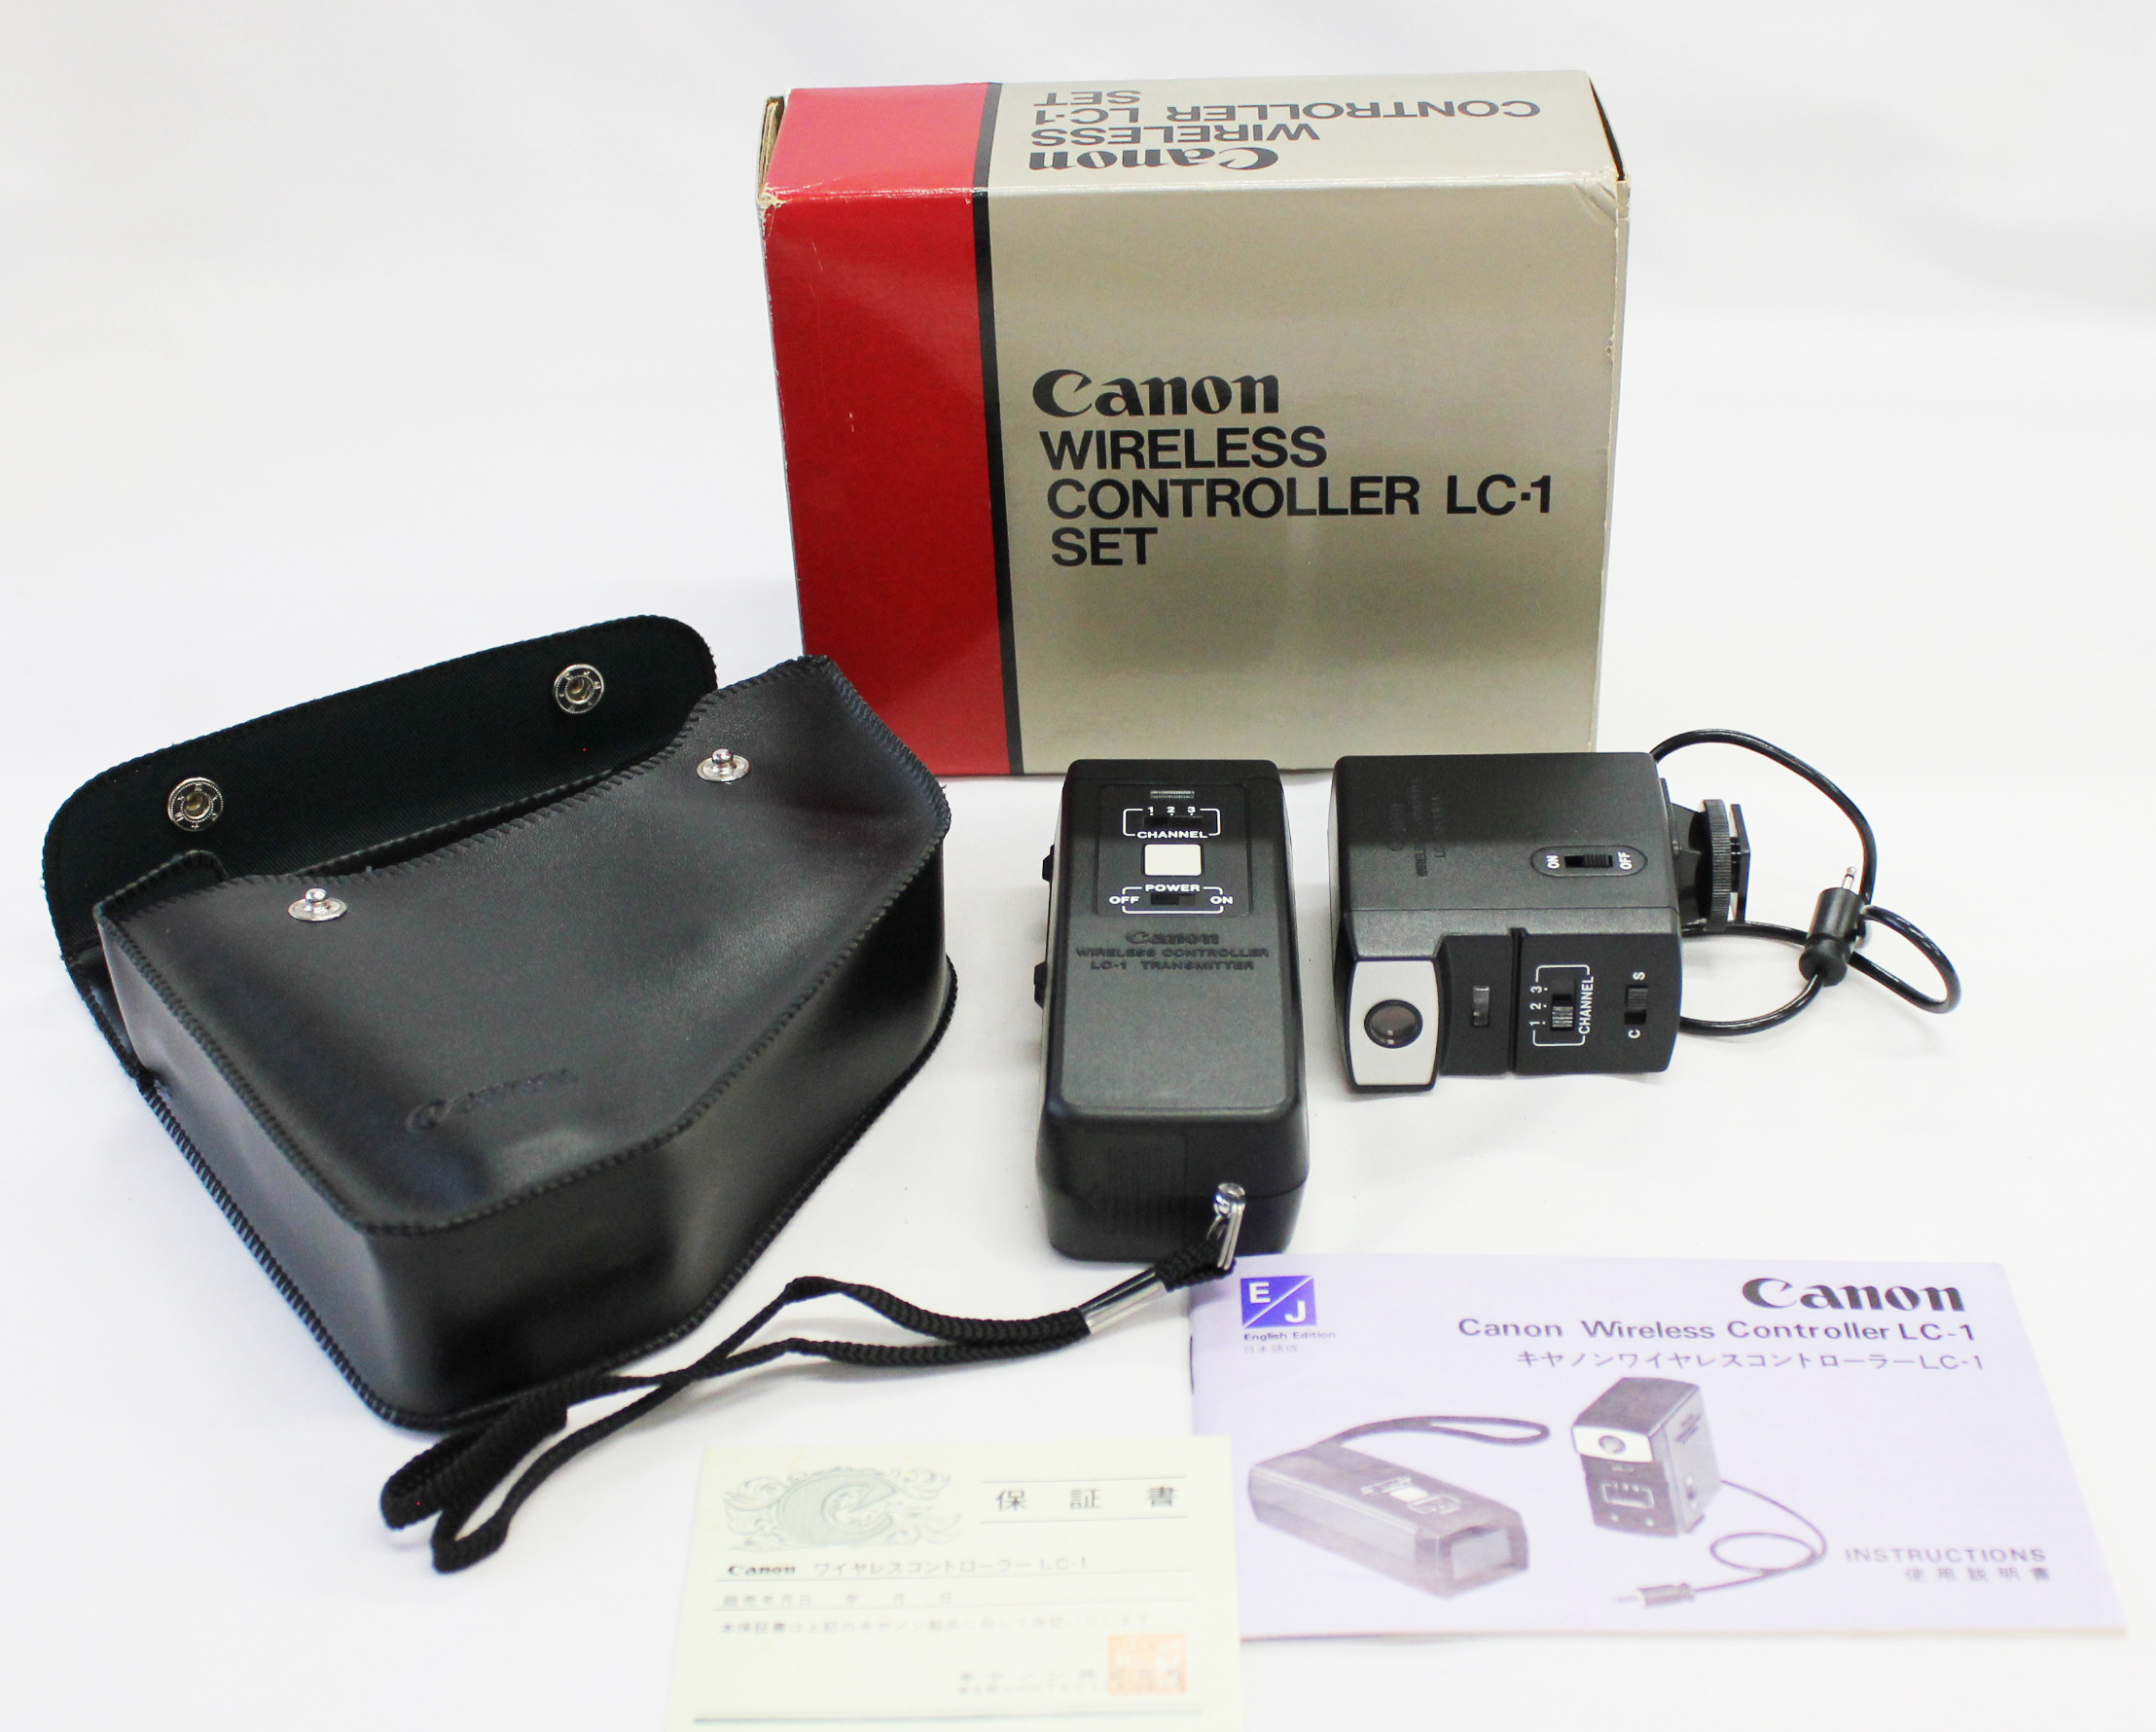 Japan Used Camera Shop | Canon Wireless Controller LC-1 Transmitter Receiver Set in Box for A-1 & F-1 from Japan 